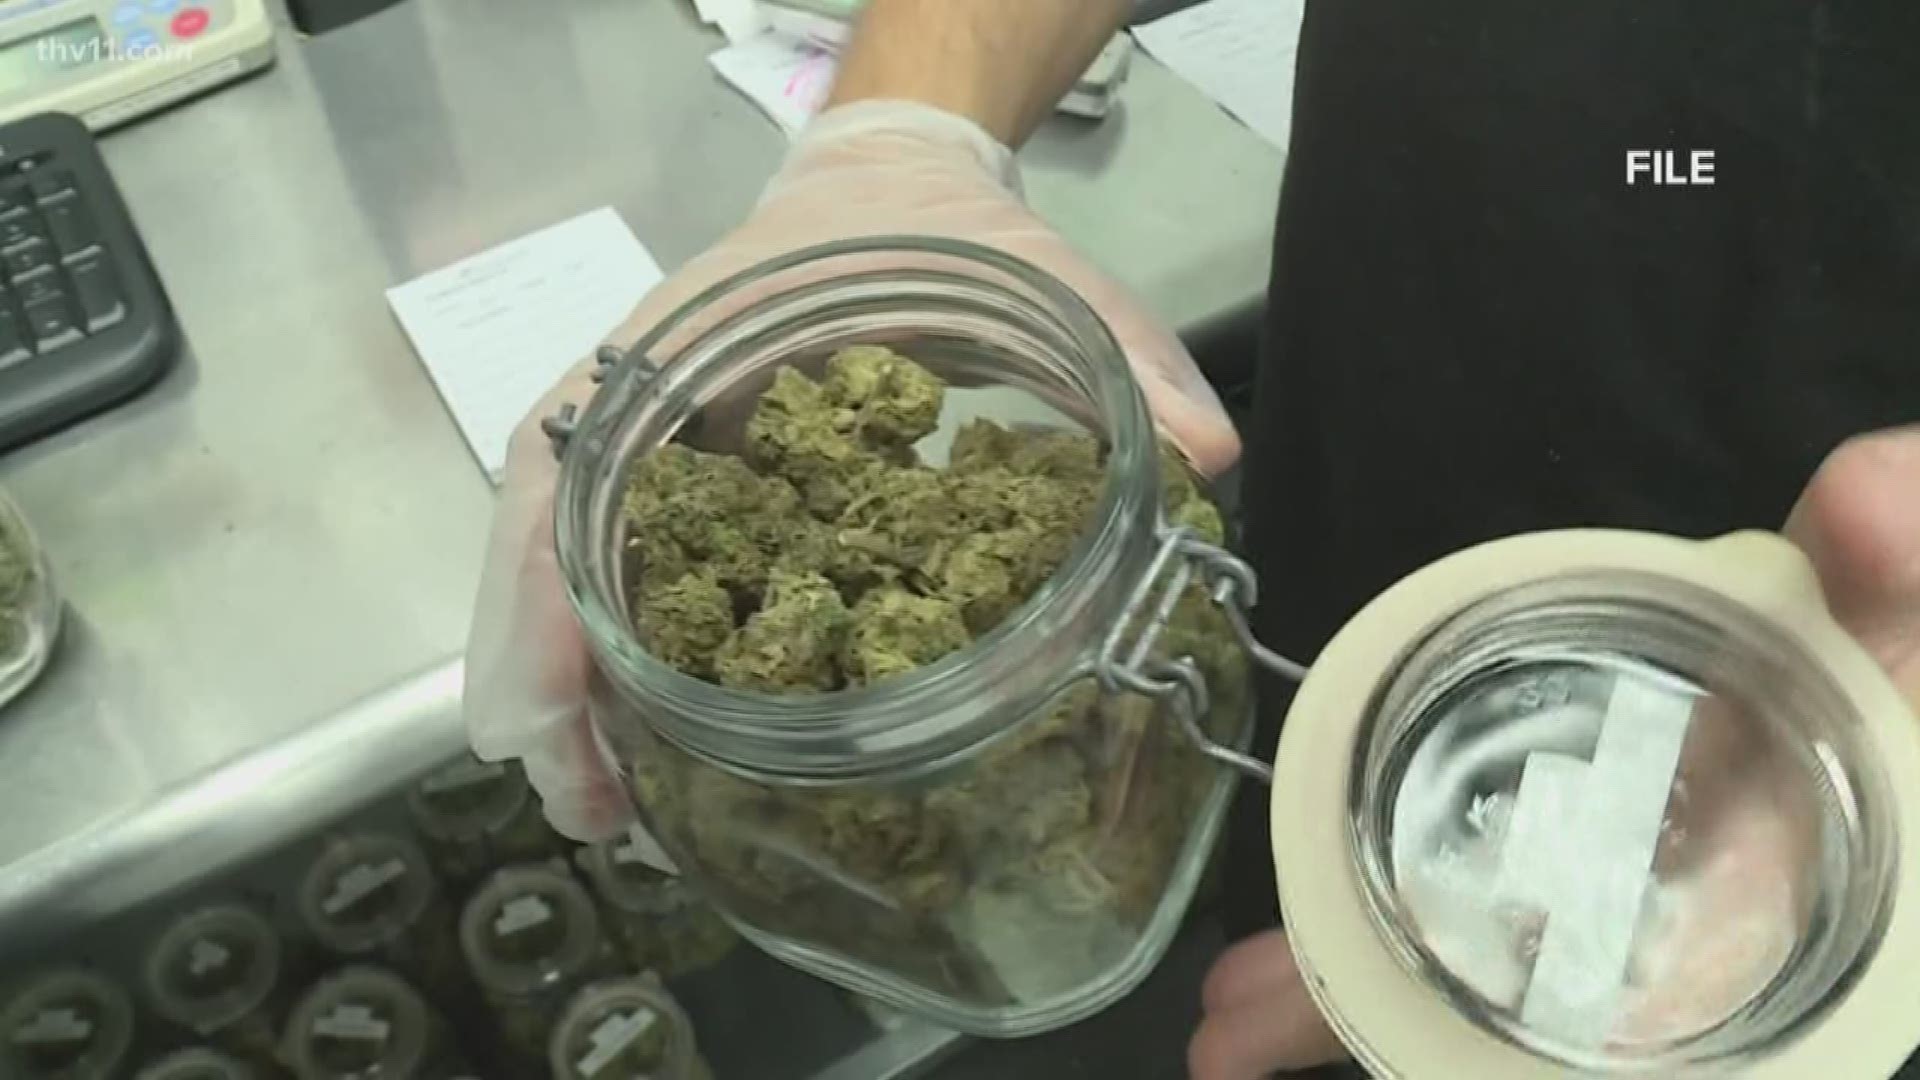 Companies are limited to one dispensary, though several applied for multiple zones. Now, companies must choose the location they'd like to license.